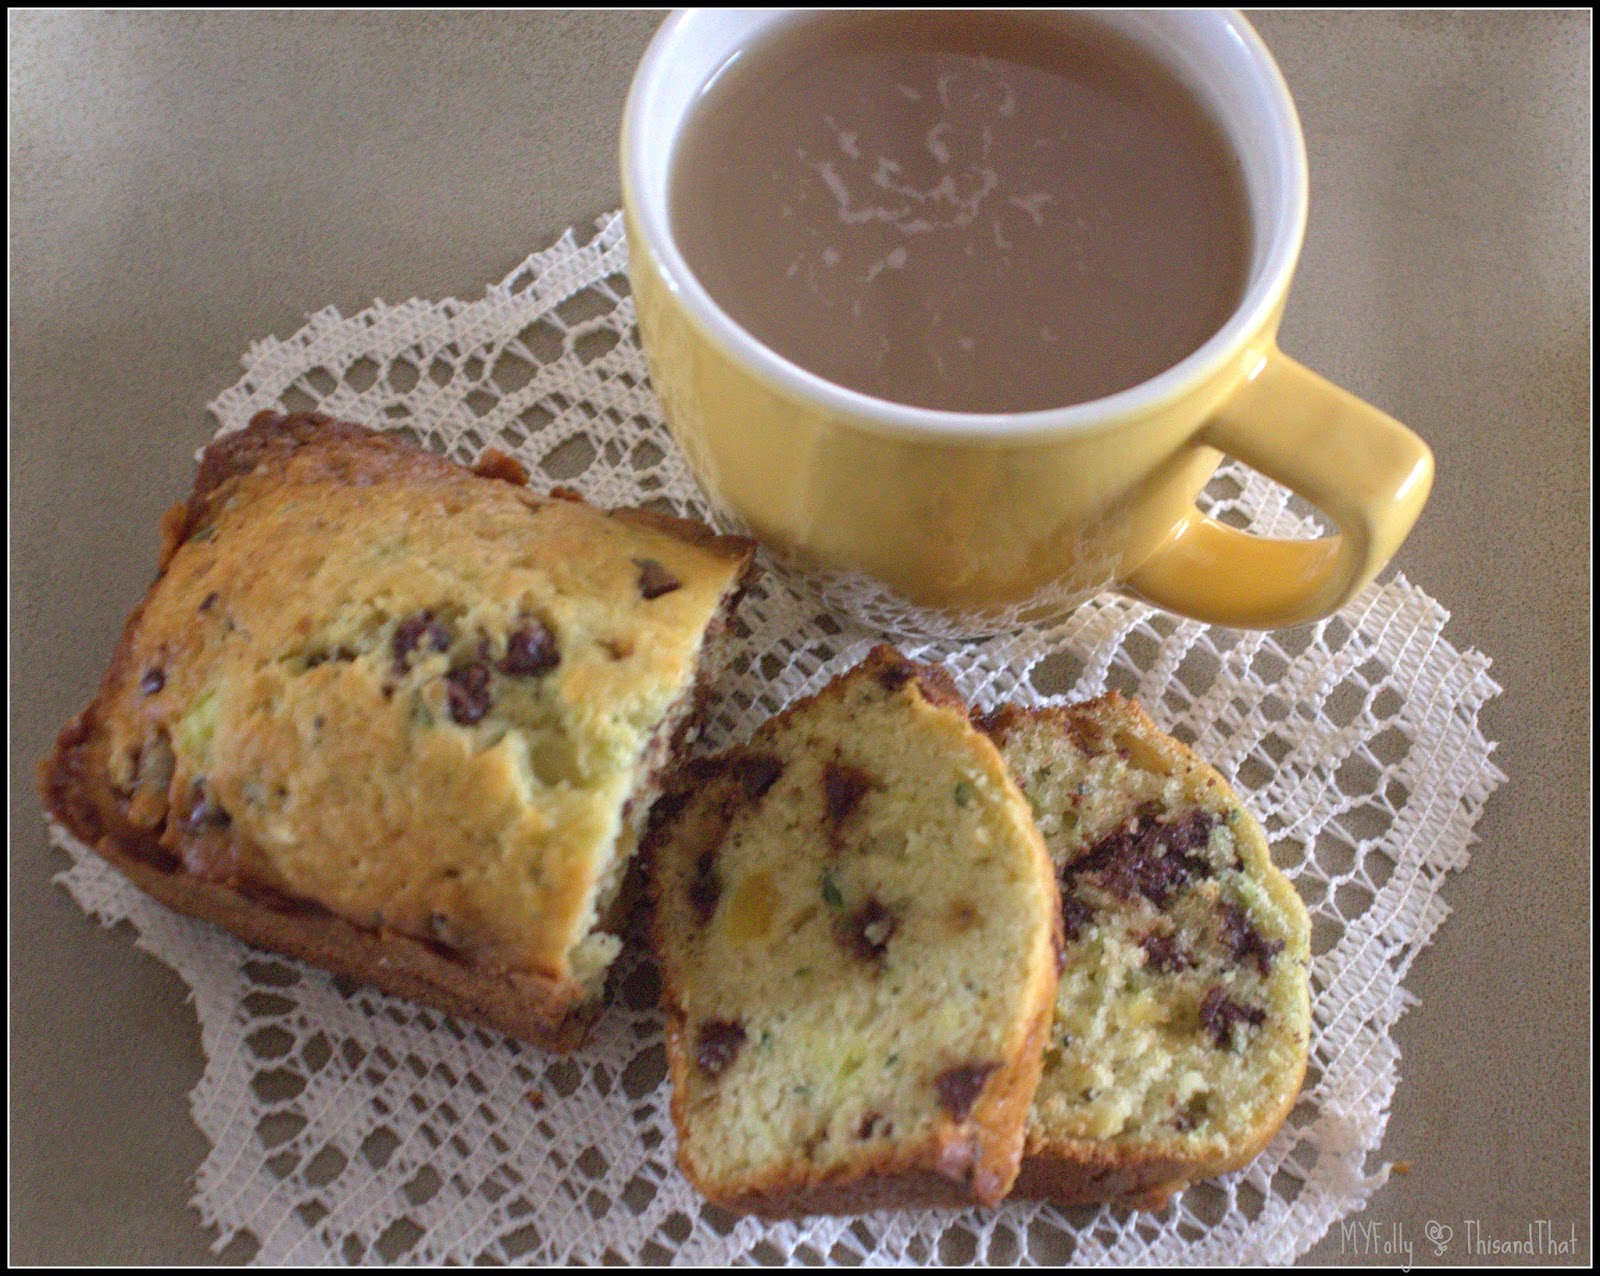 This and That: Zucchini Bread with Chocolate and Crystallized Ginger  #zucchinibread #zulkamorenasugar